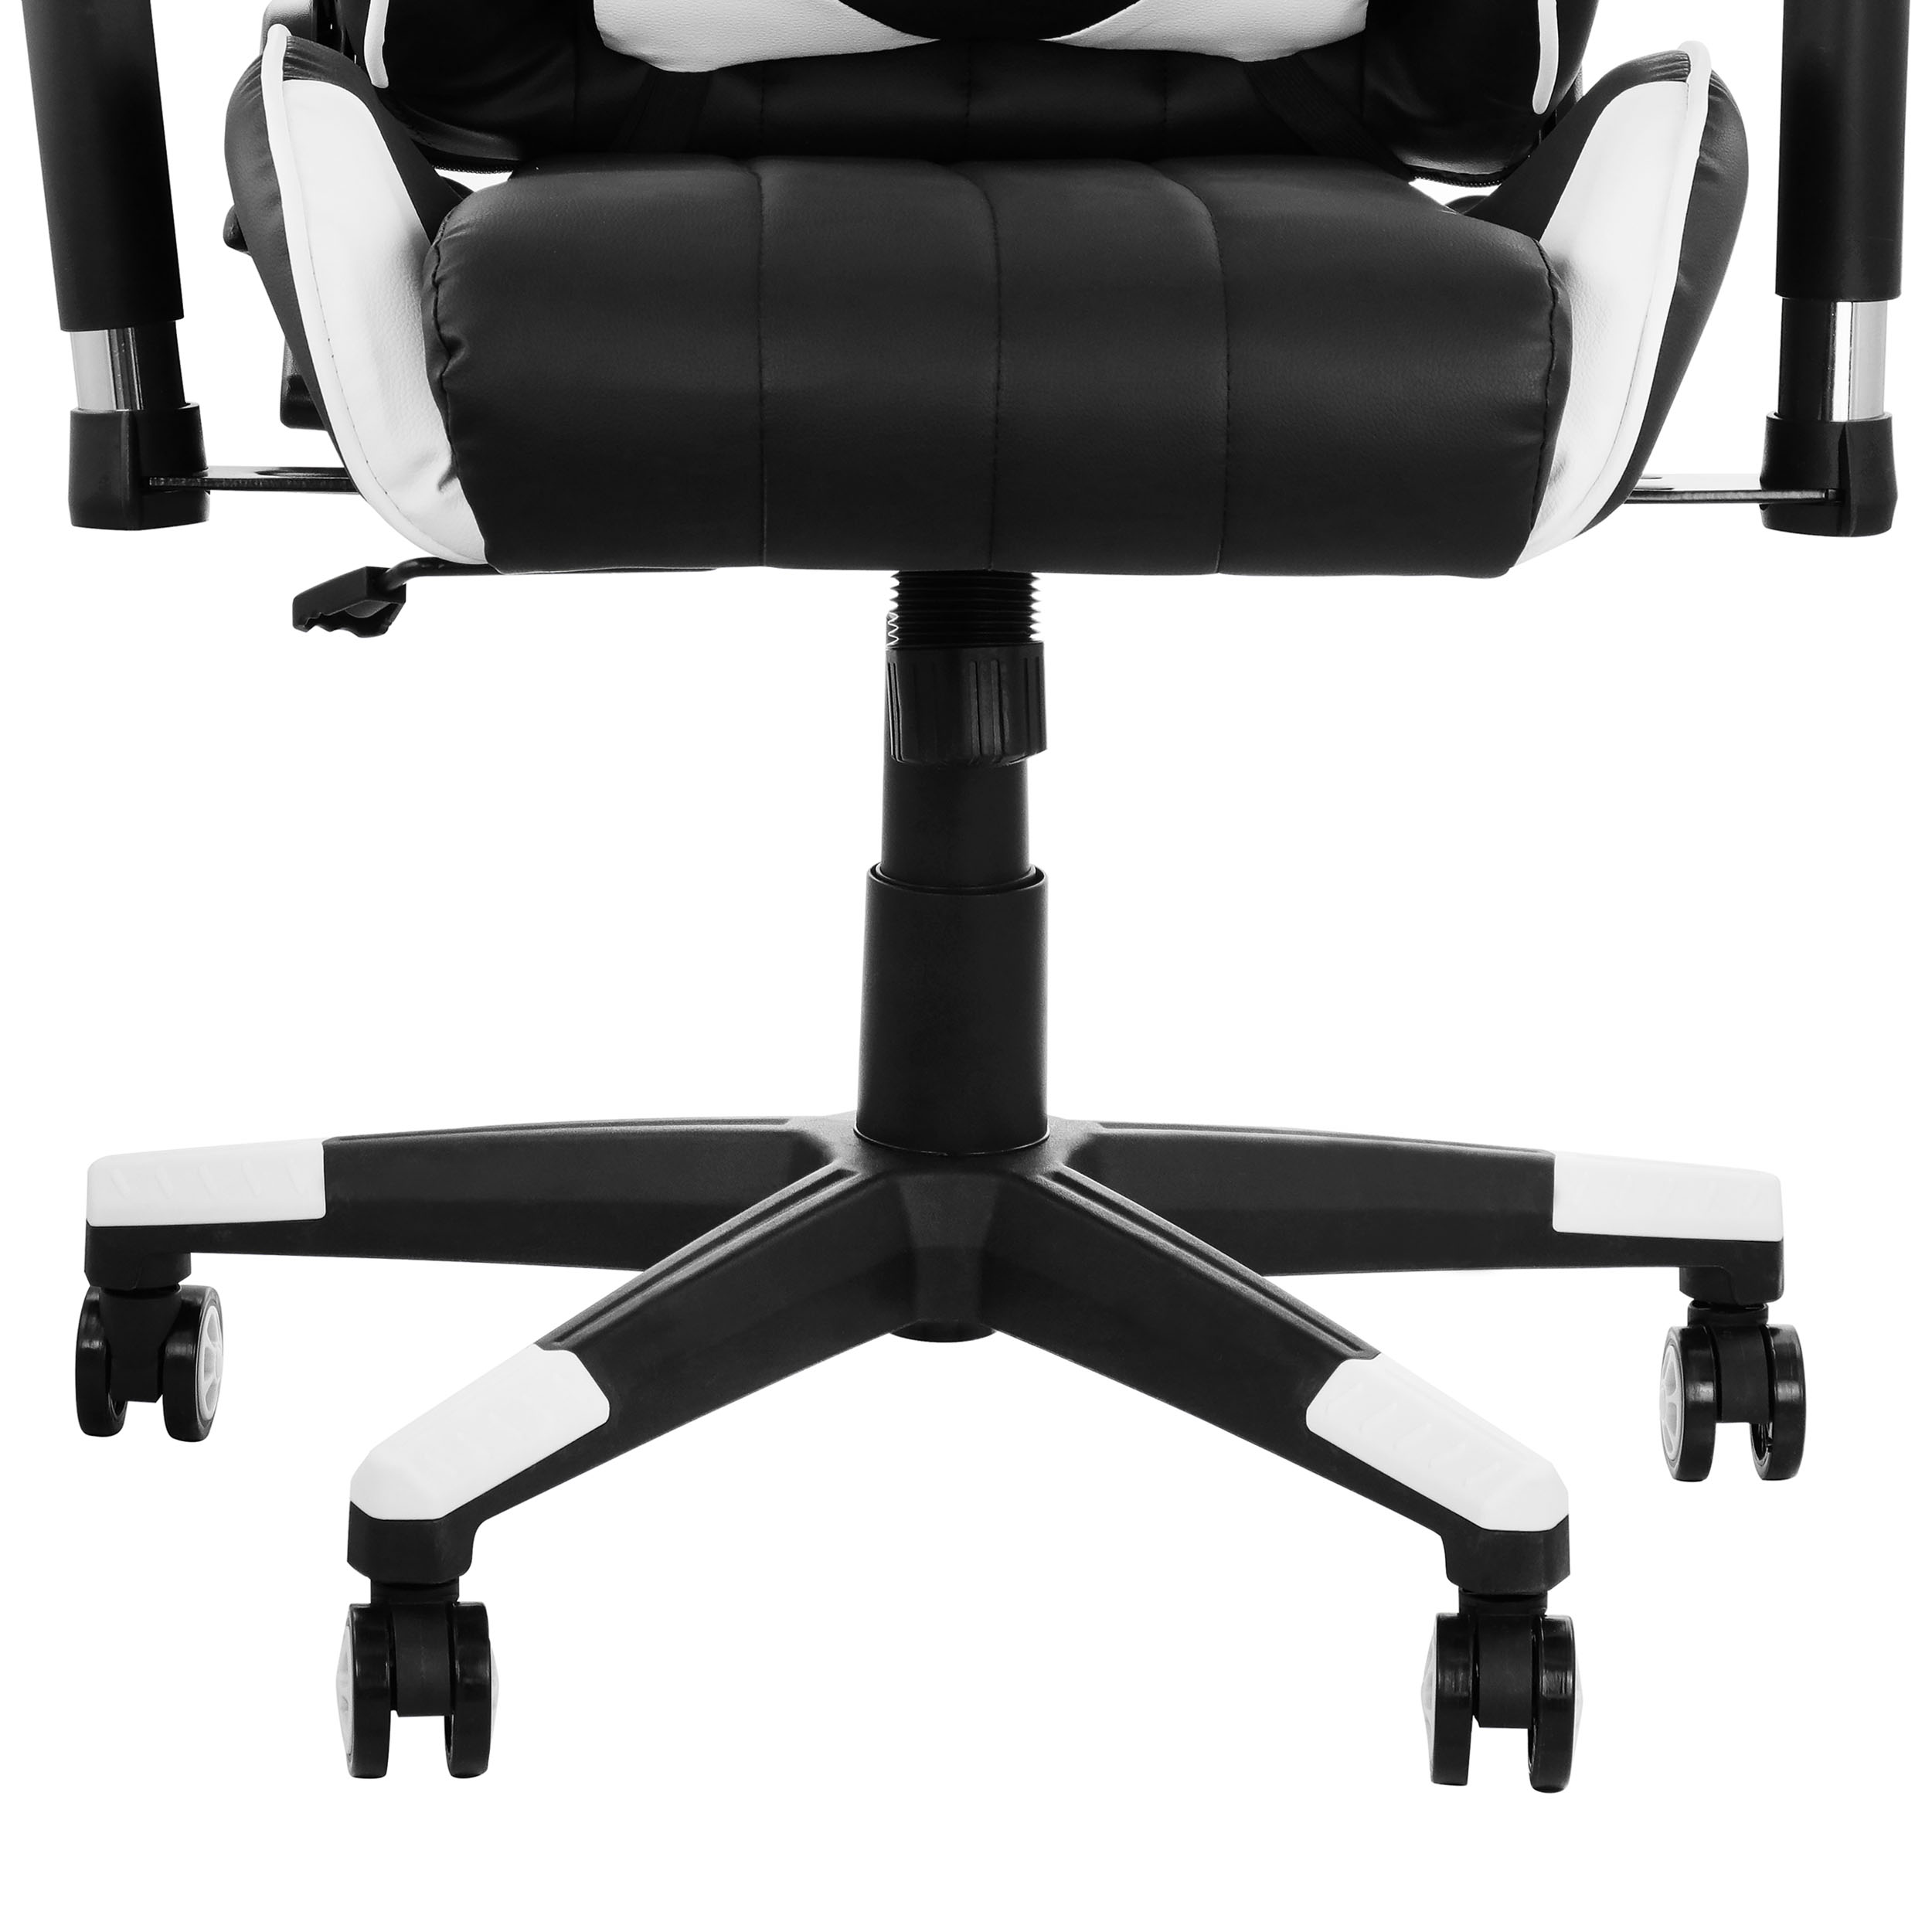 GameFitz Gaming Chair in Black and White Trim